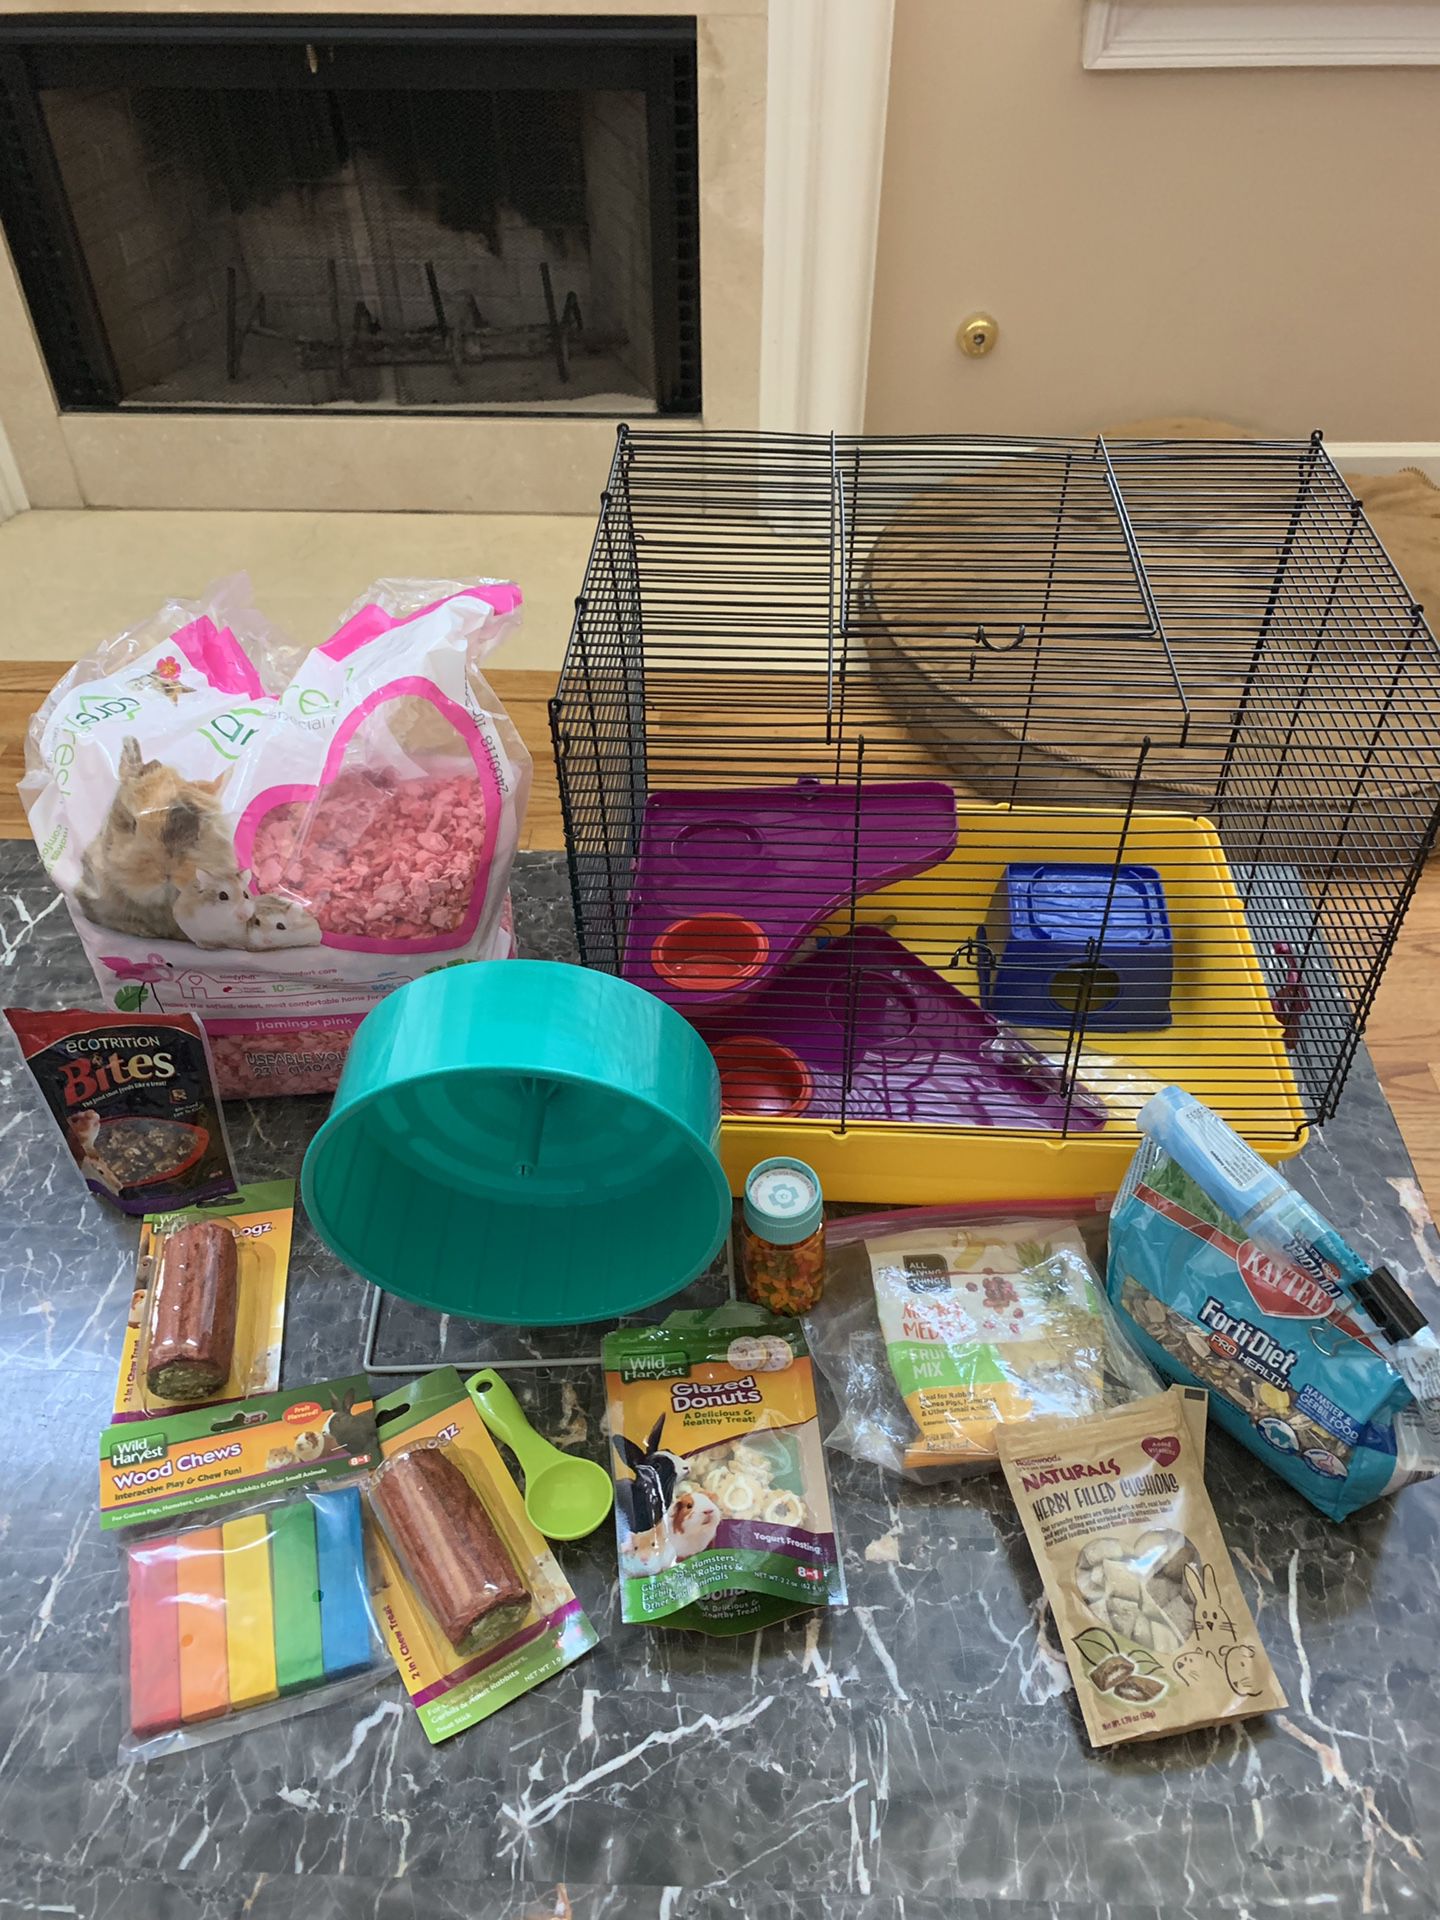 Hamster (small pet) cage & supplies